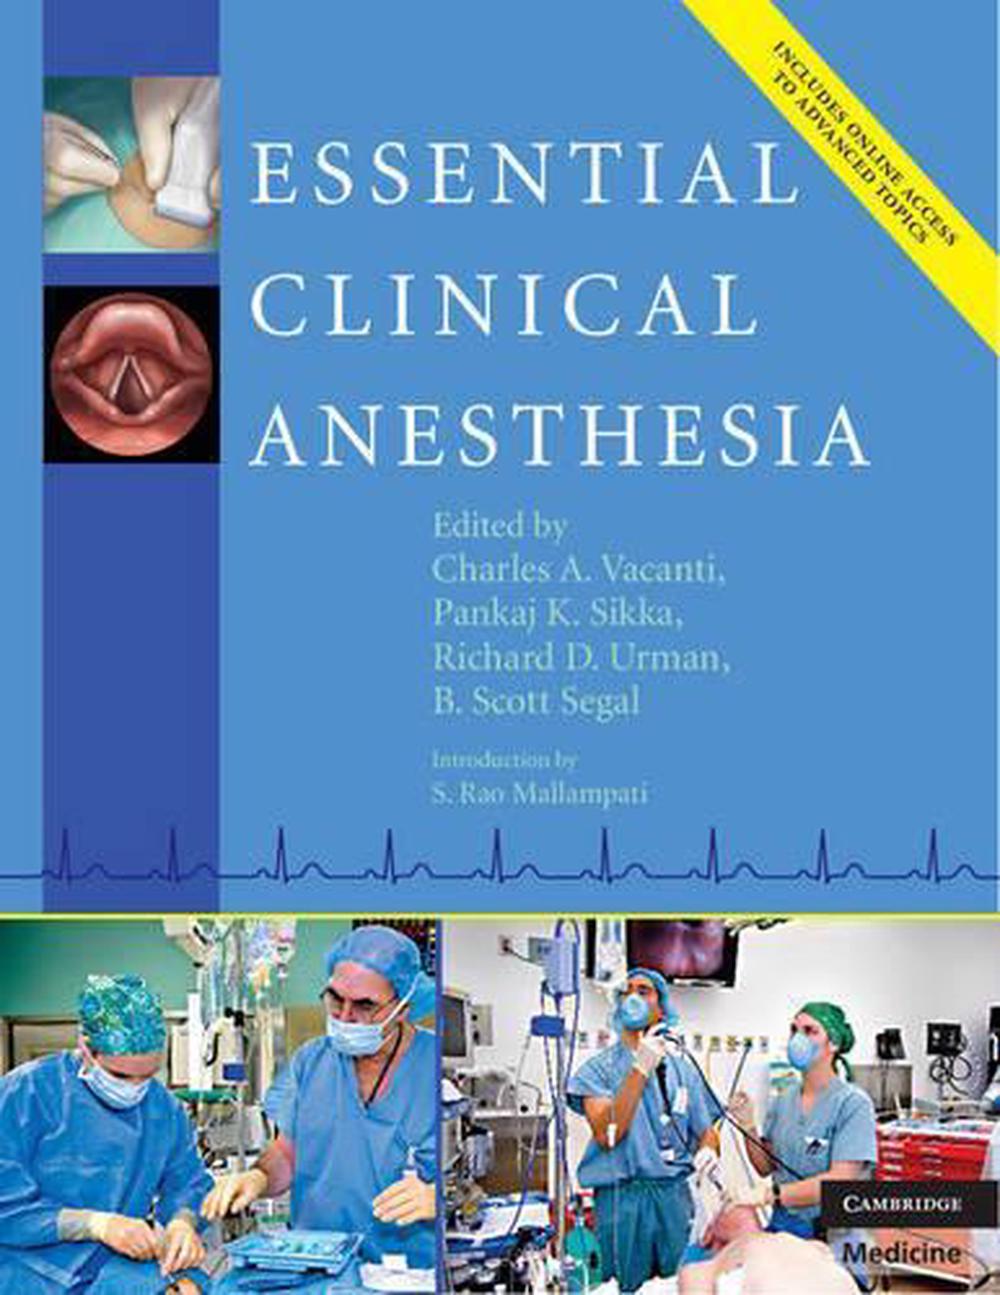 anesthesiology research topics